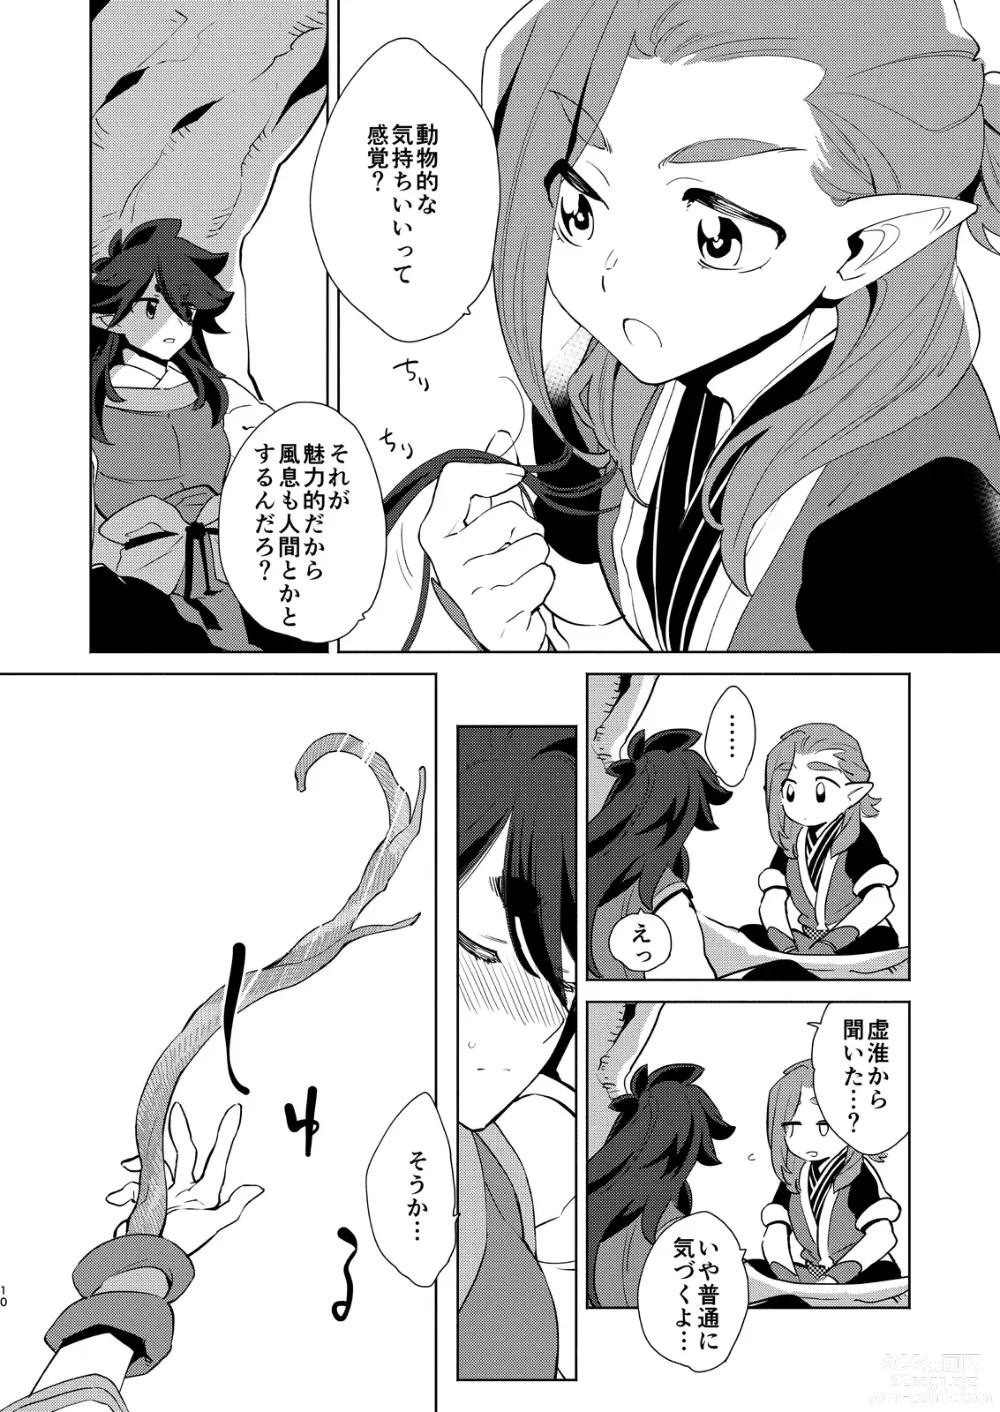 Page 10 of doujinshi Onii-san to Issho